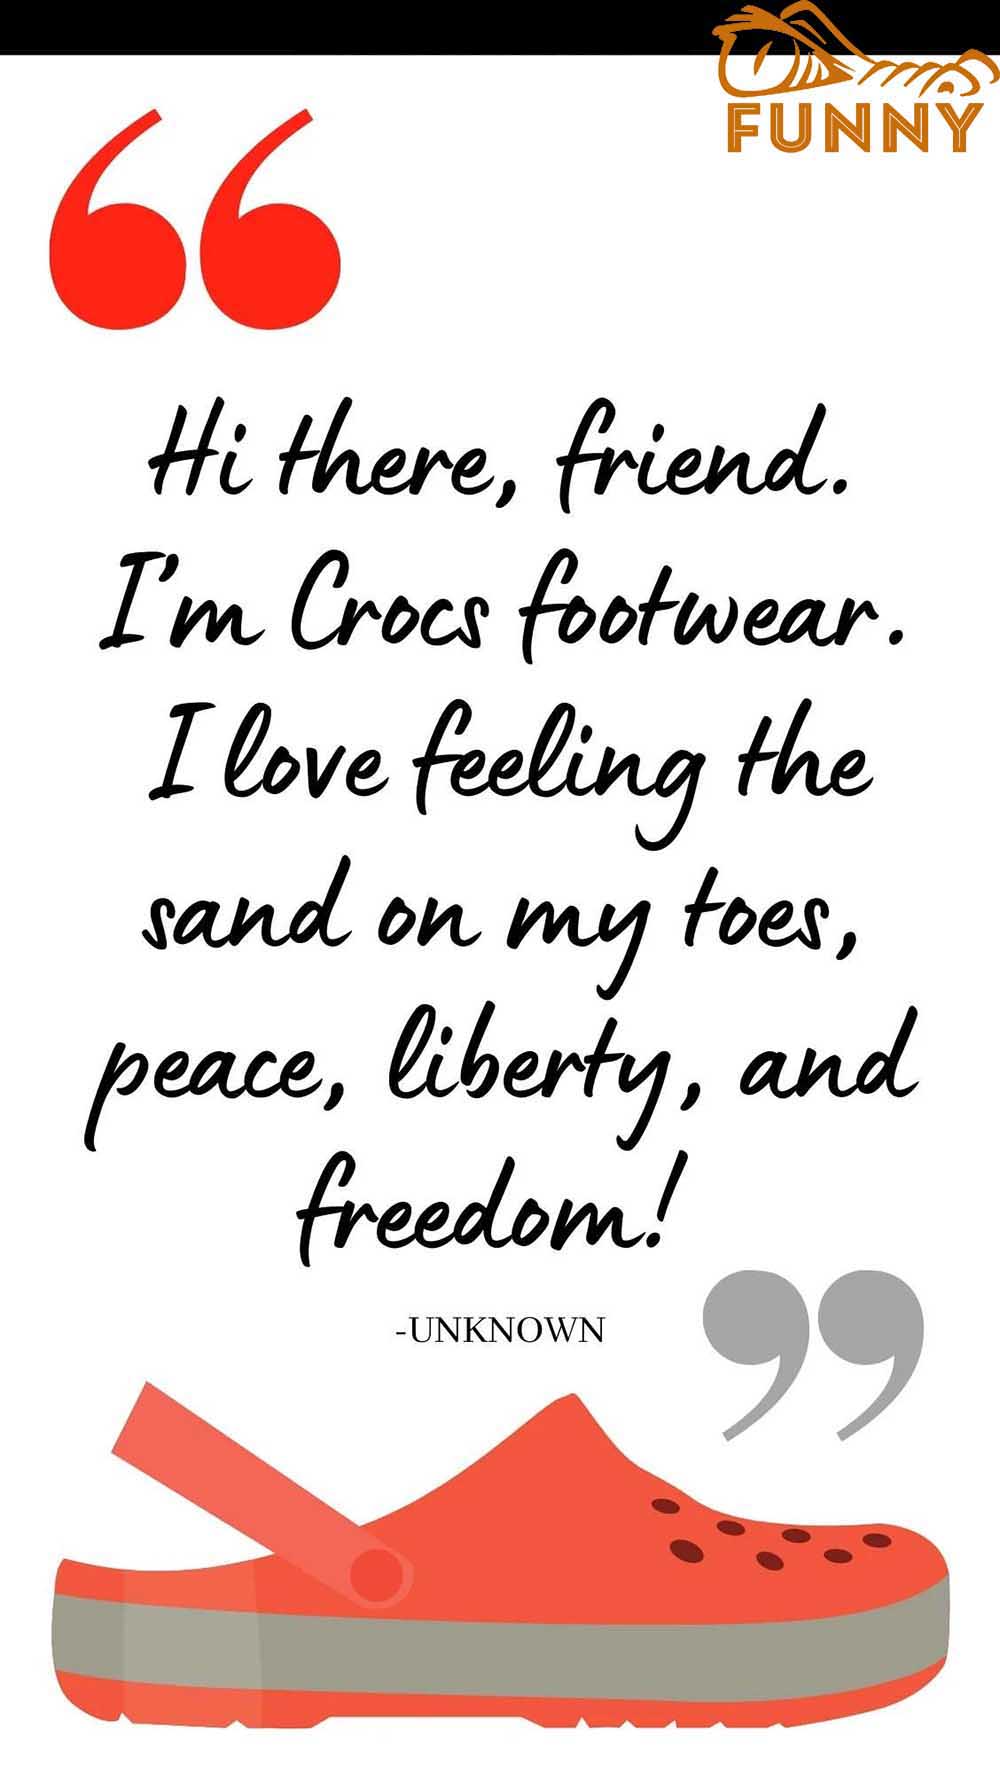 Hi there friend Im Crocs footwear I love feeling the sand on my toes peace liberty and freedom